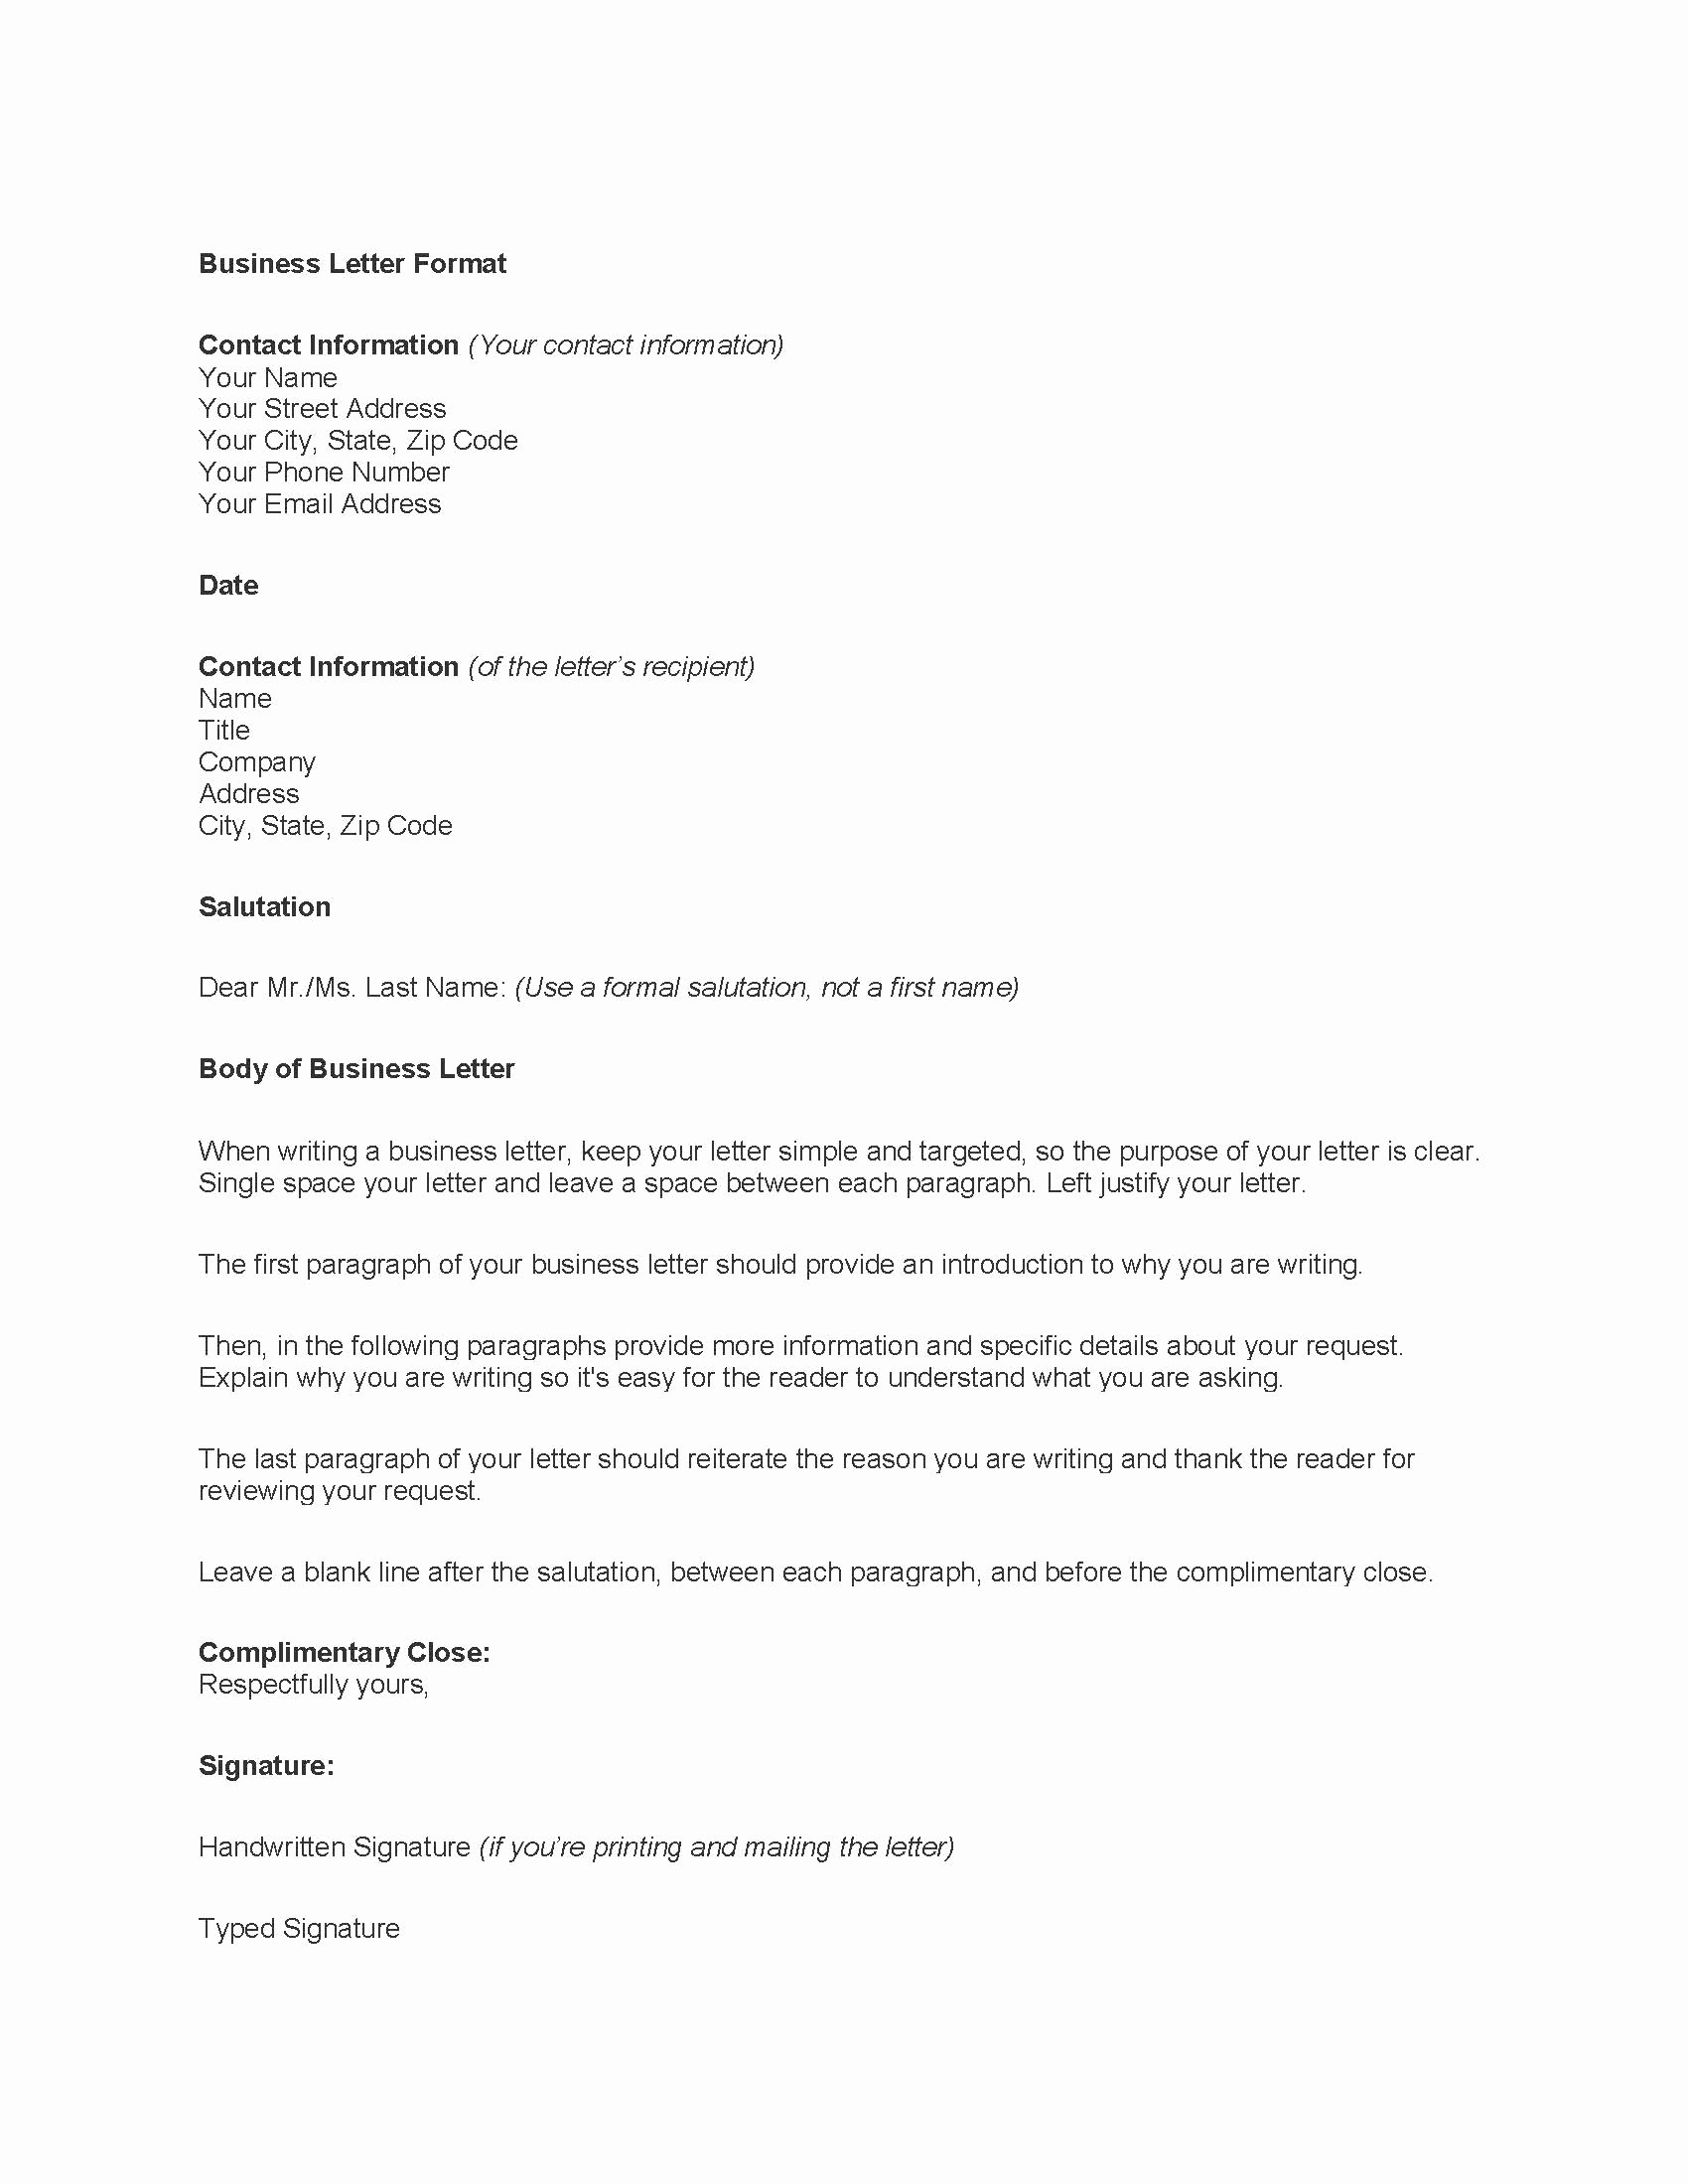 Business Letter format Template Word Awesome Business Letter Template Uk